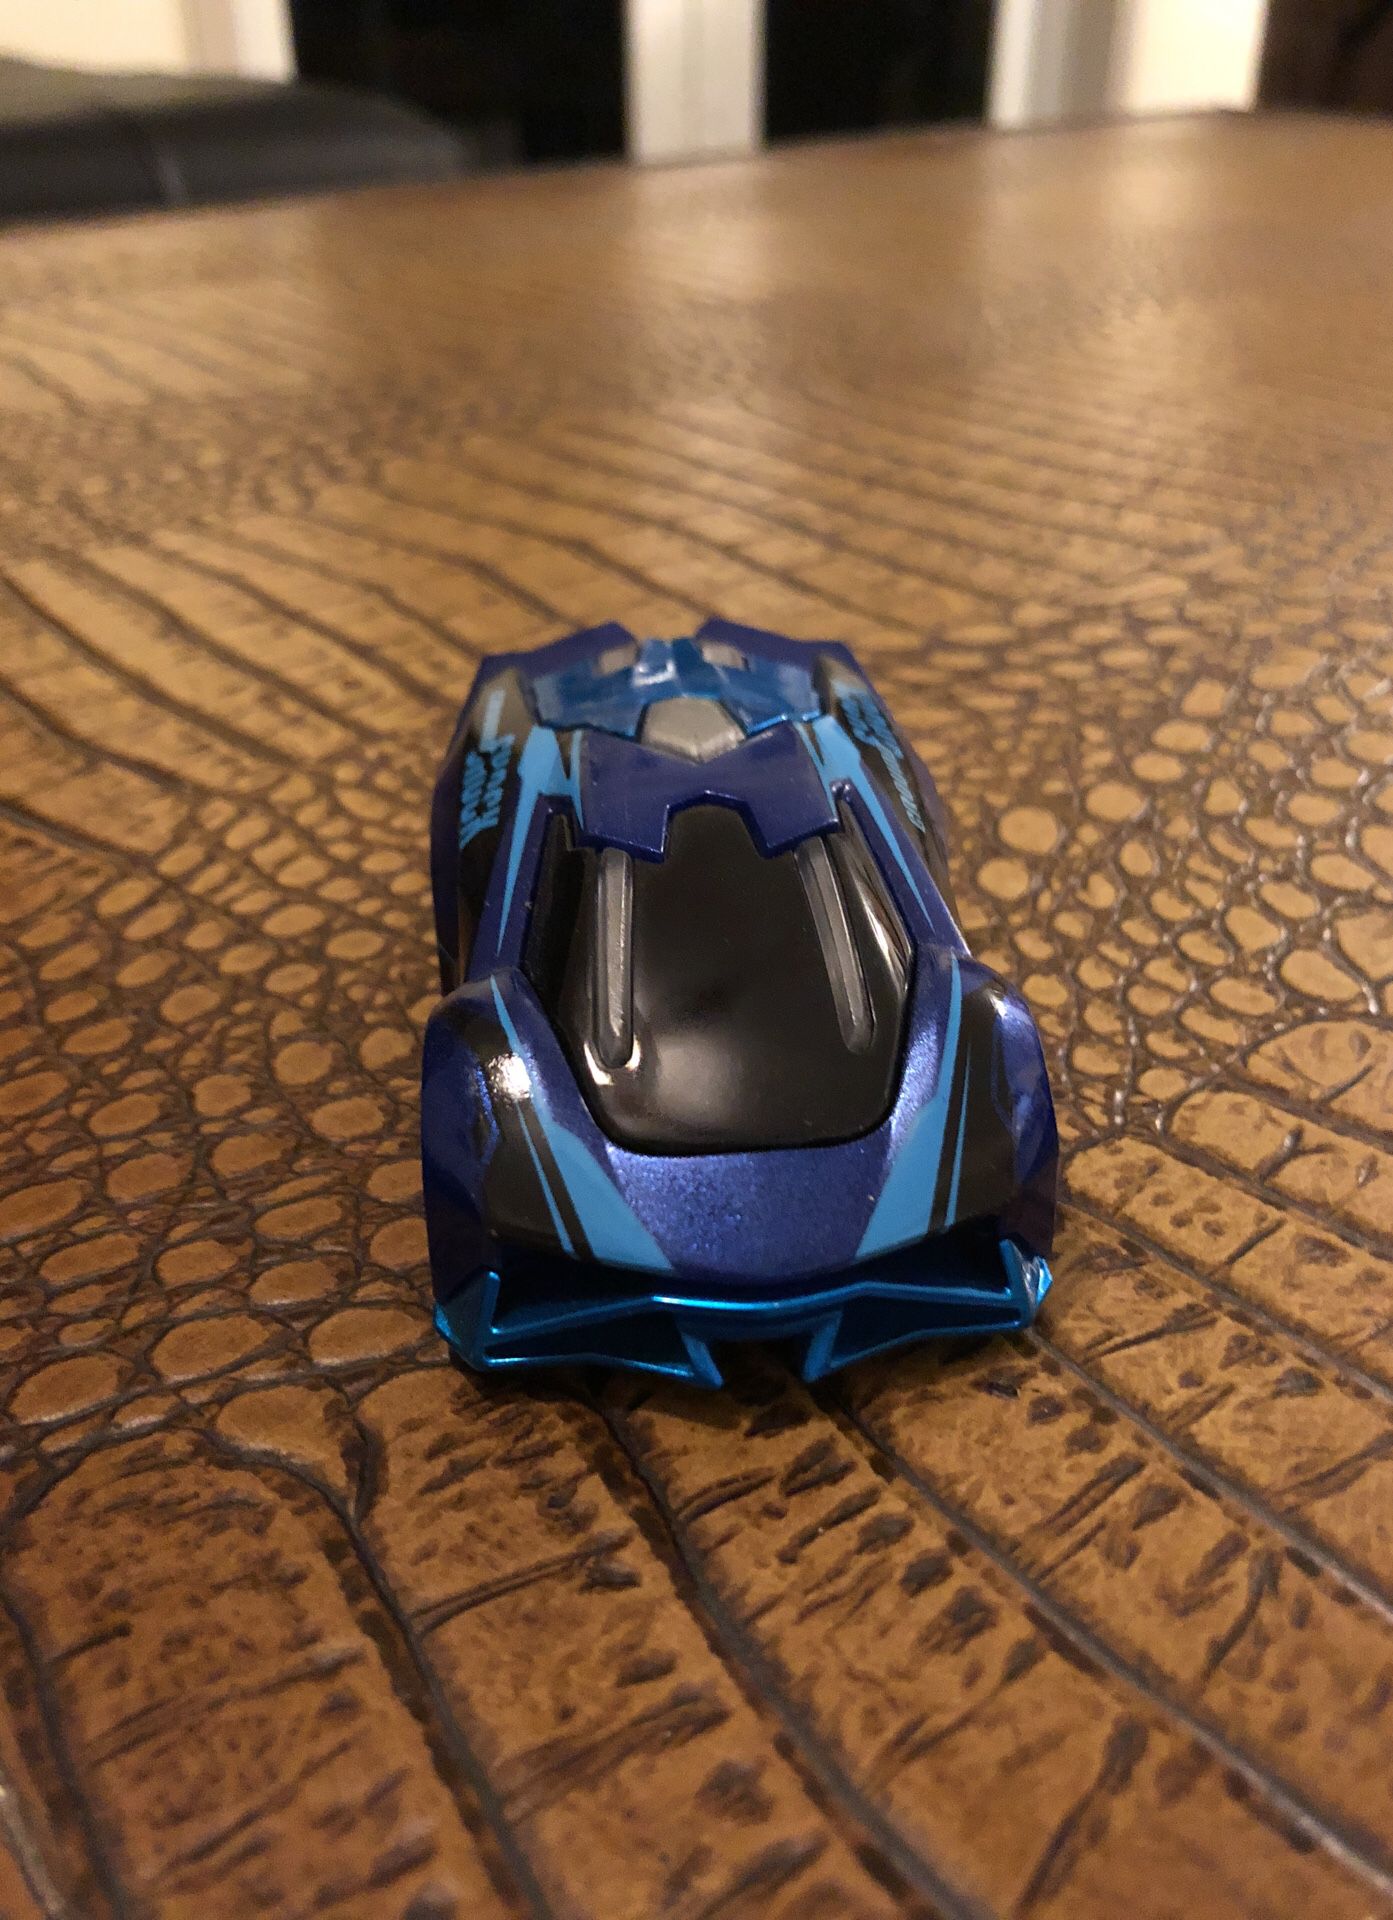 Anki overdrive electro ice racing game includes all